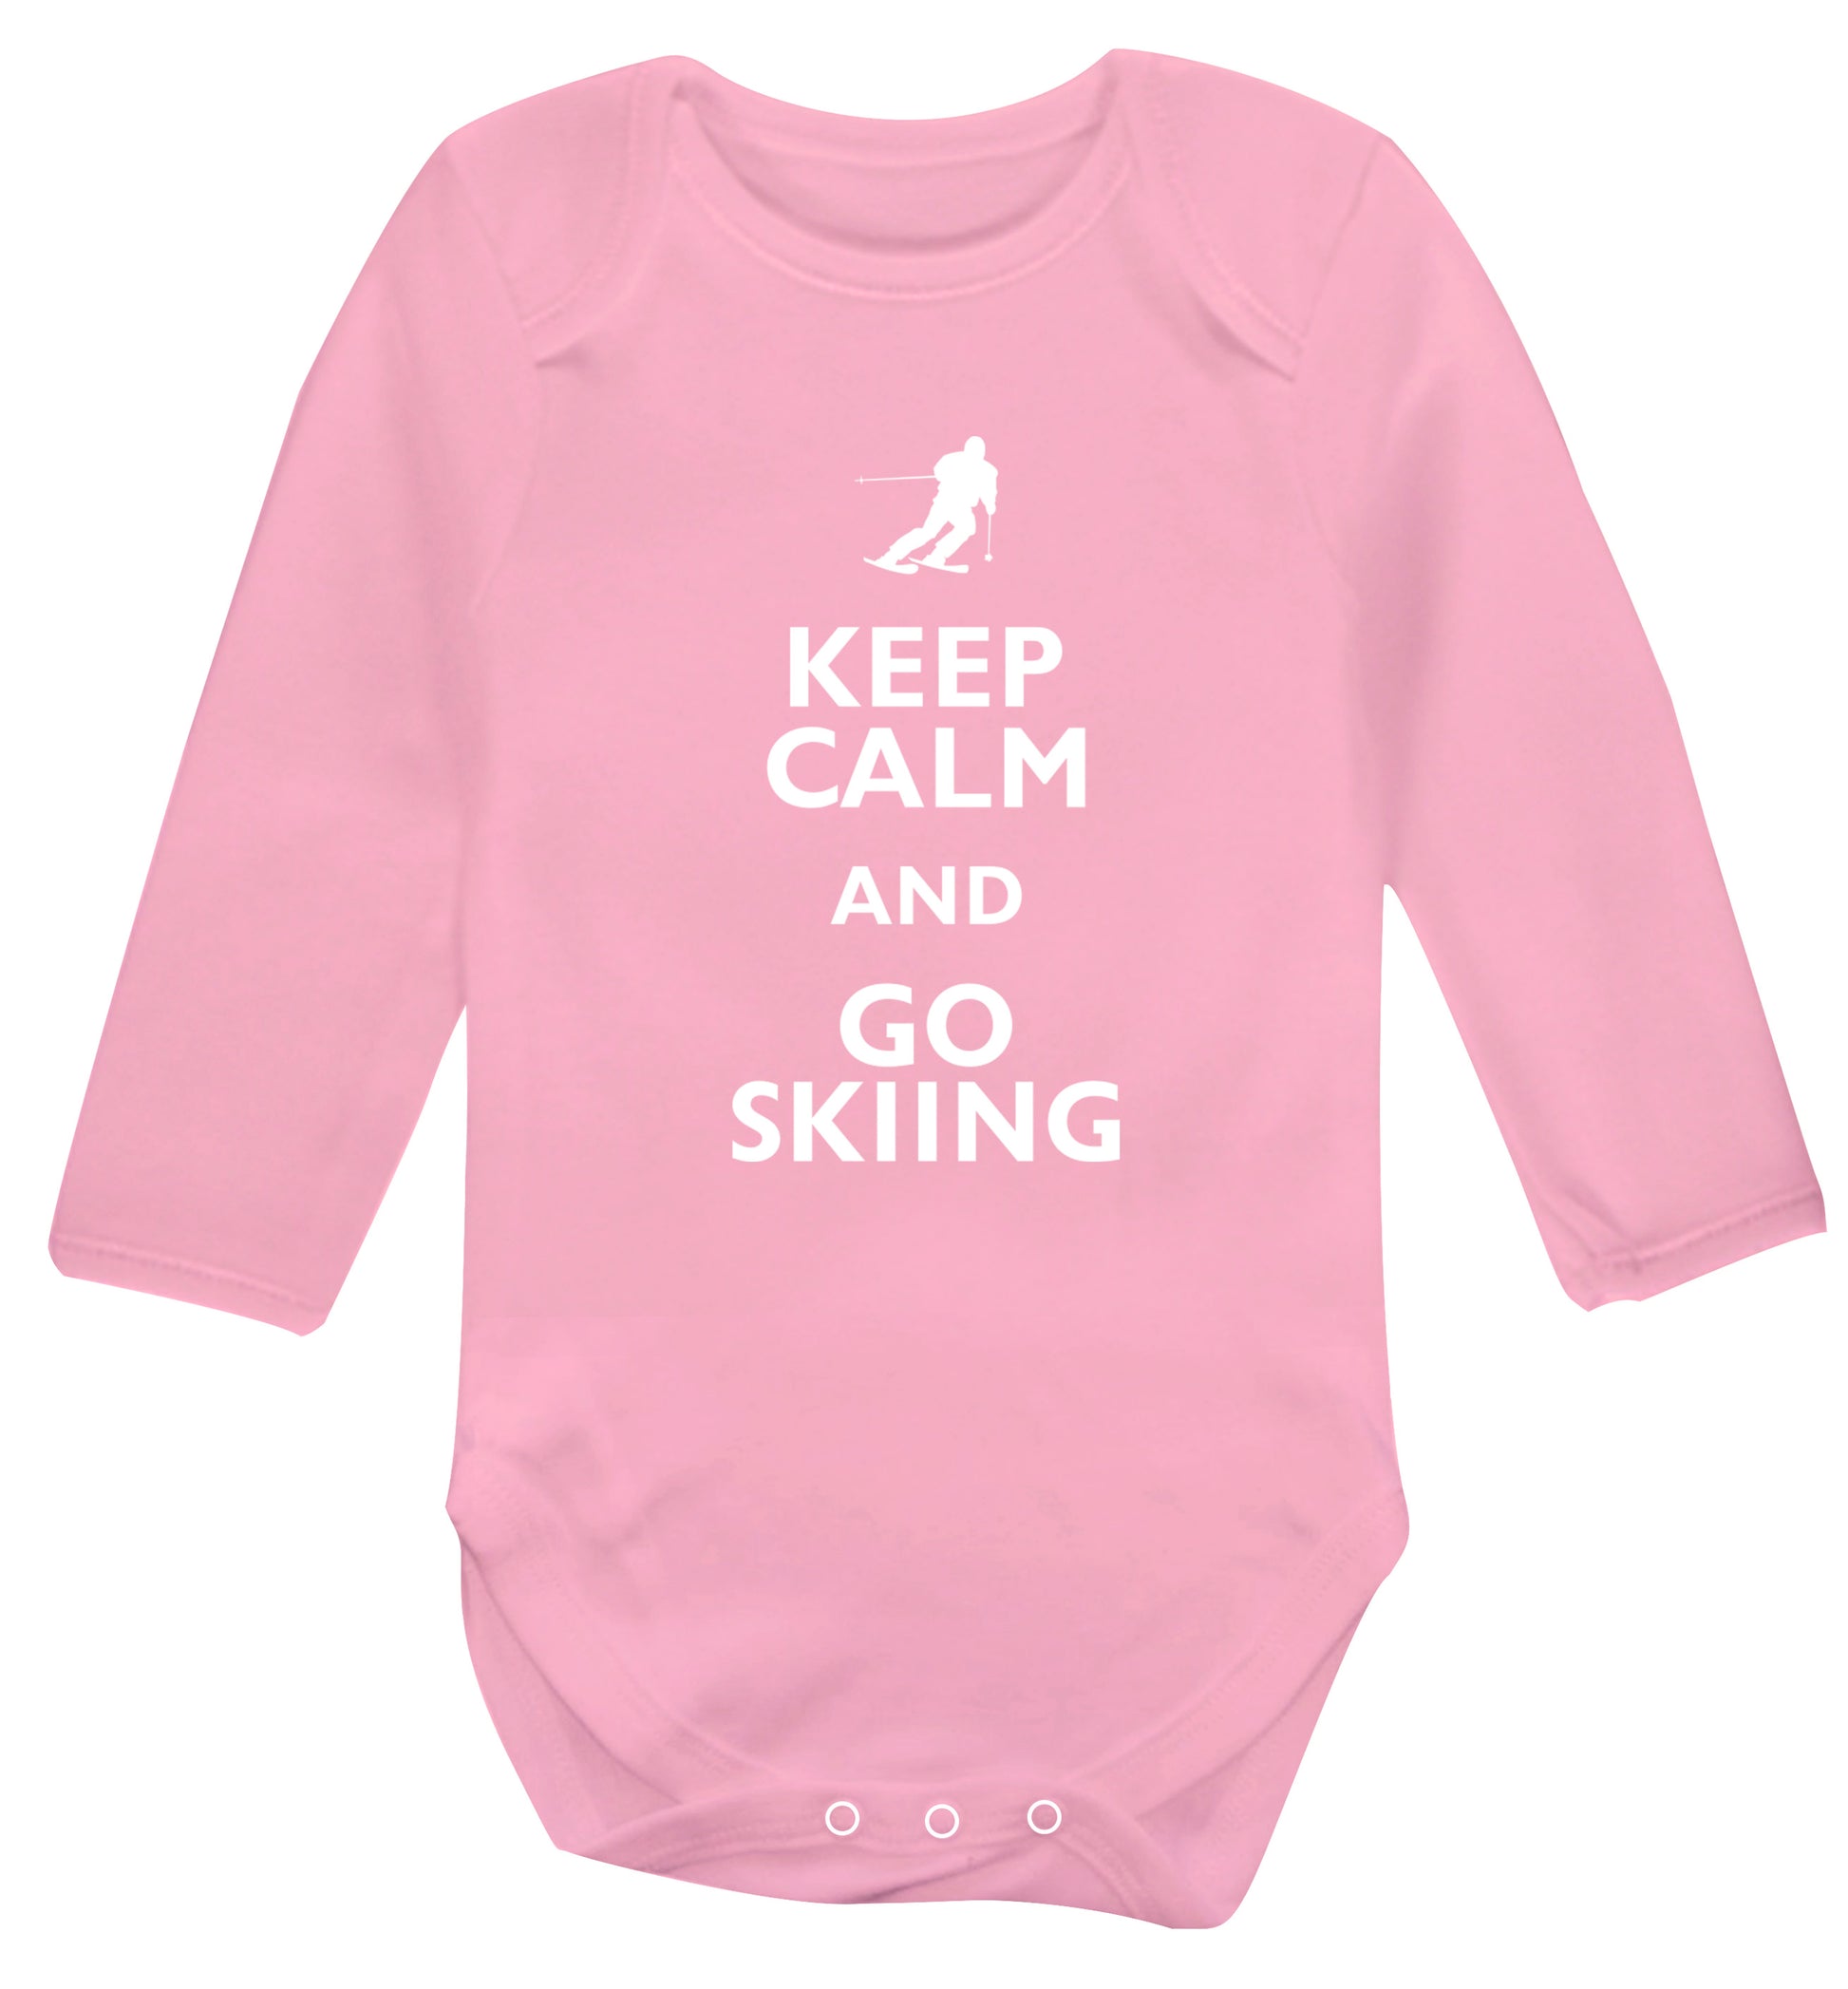 Keep calm and go skiing Baby Vest long sleeved pale pink 6-12 months